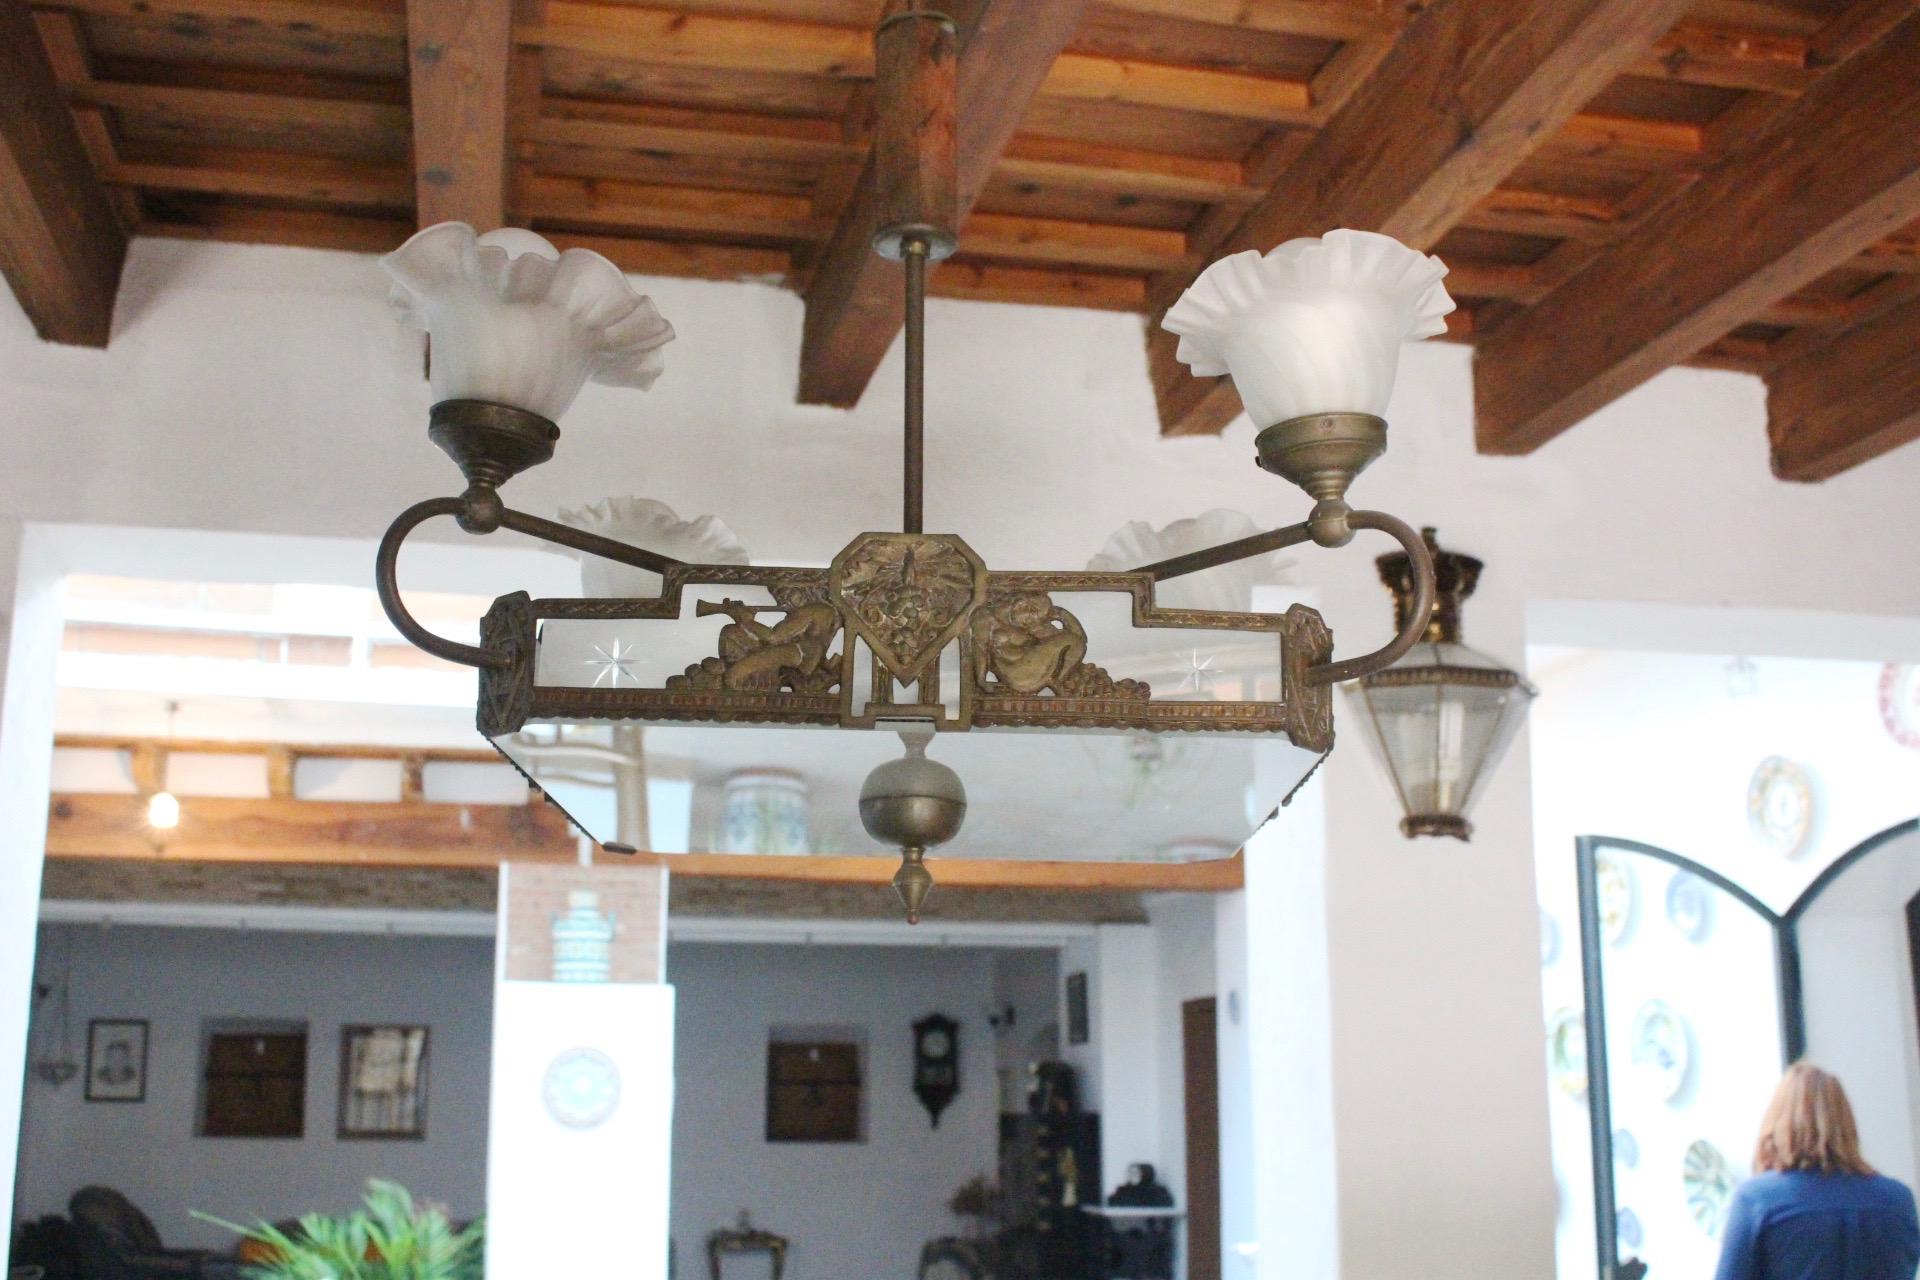 Art Deco brass and white glass chandelier, Spain, 1930s.
- Stem, with a piece of wood.
- Acid and hand etched glass shades,
- Patina all over the brass. Can be removed under request.
Note: Piece belong to a personal collector who is selling the